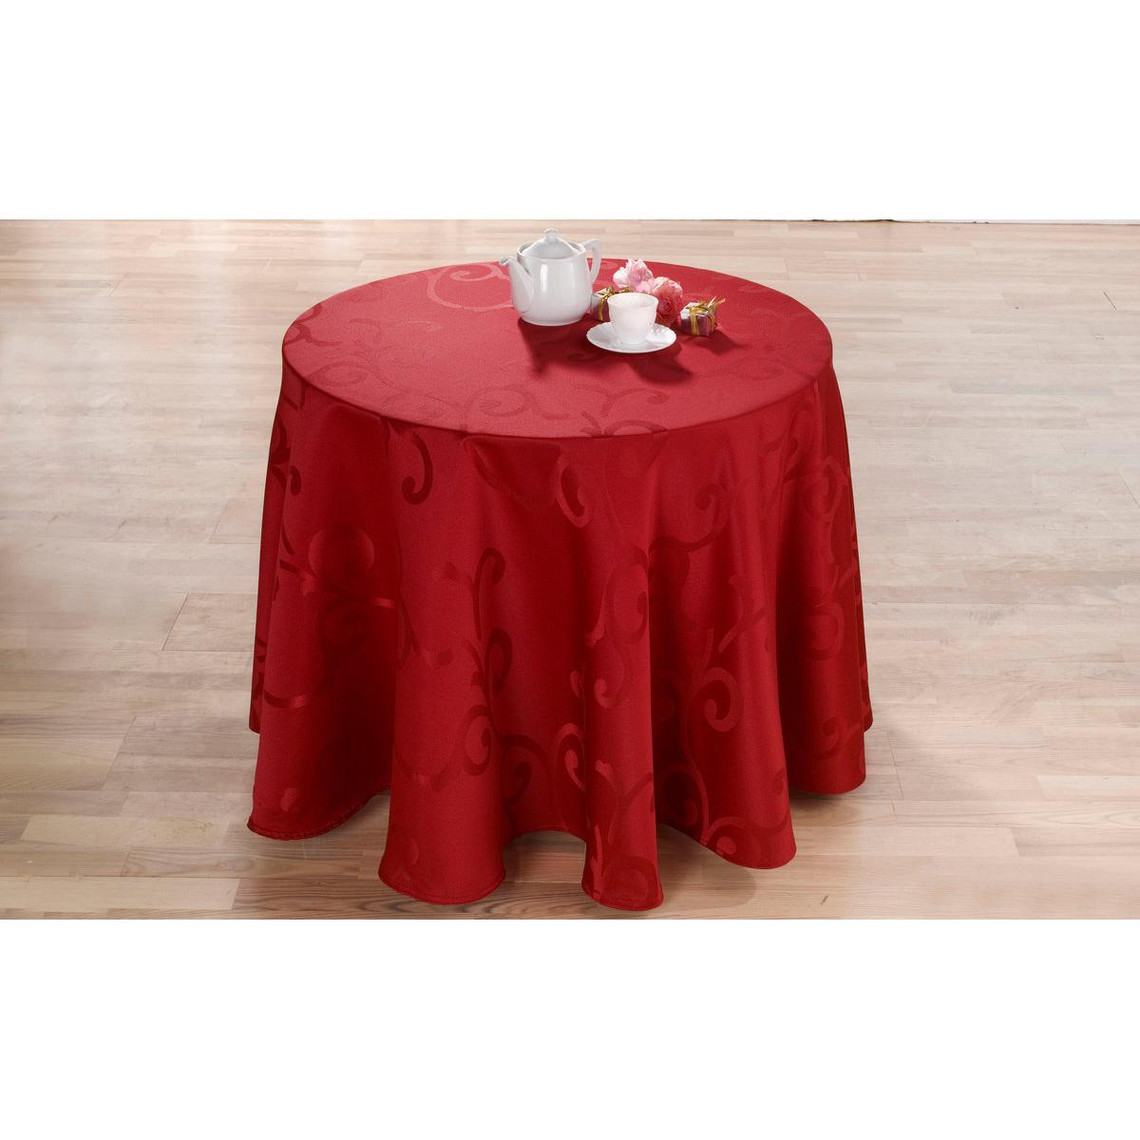 nappe textile madignan ronde rouge